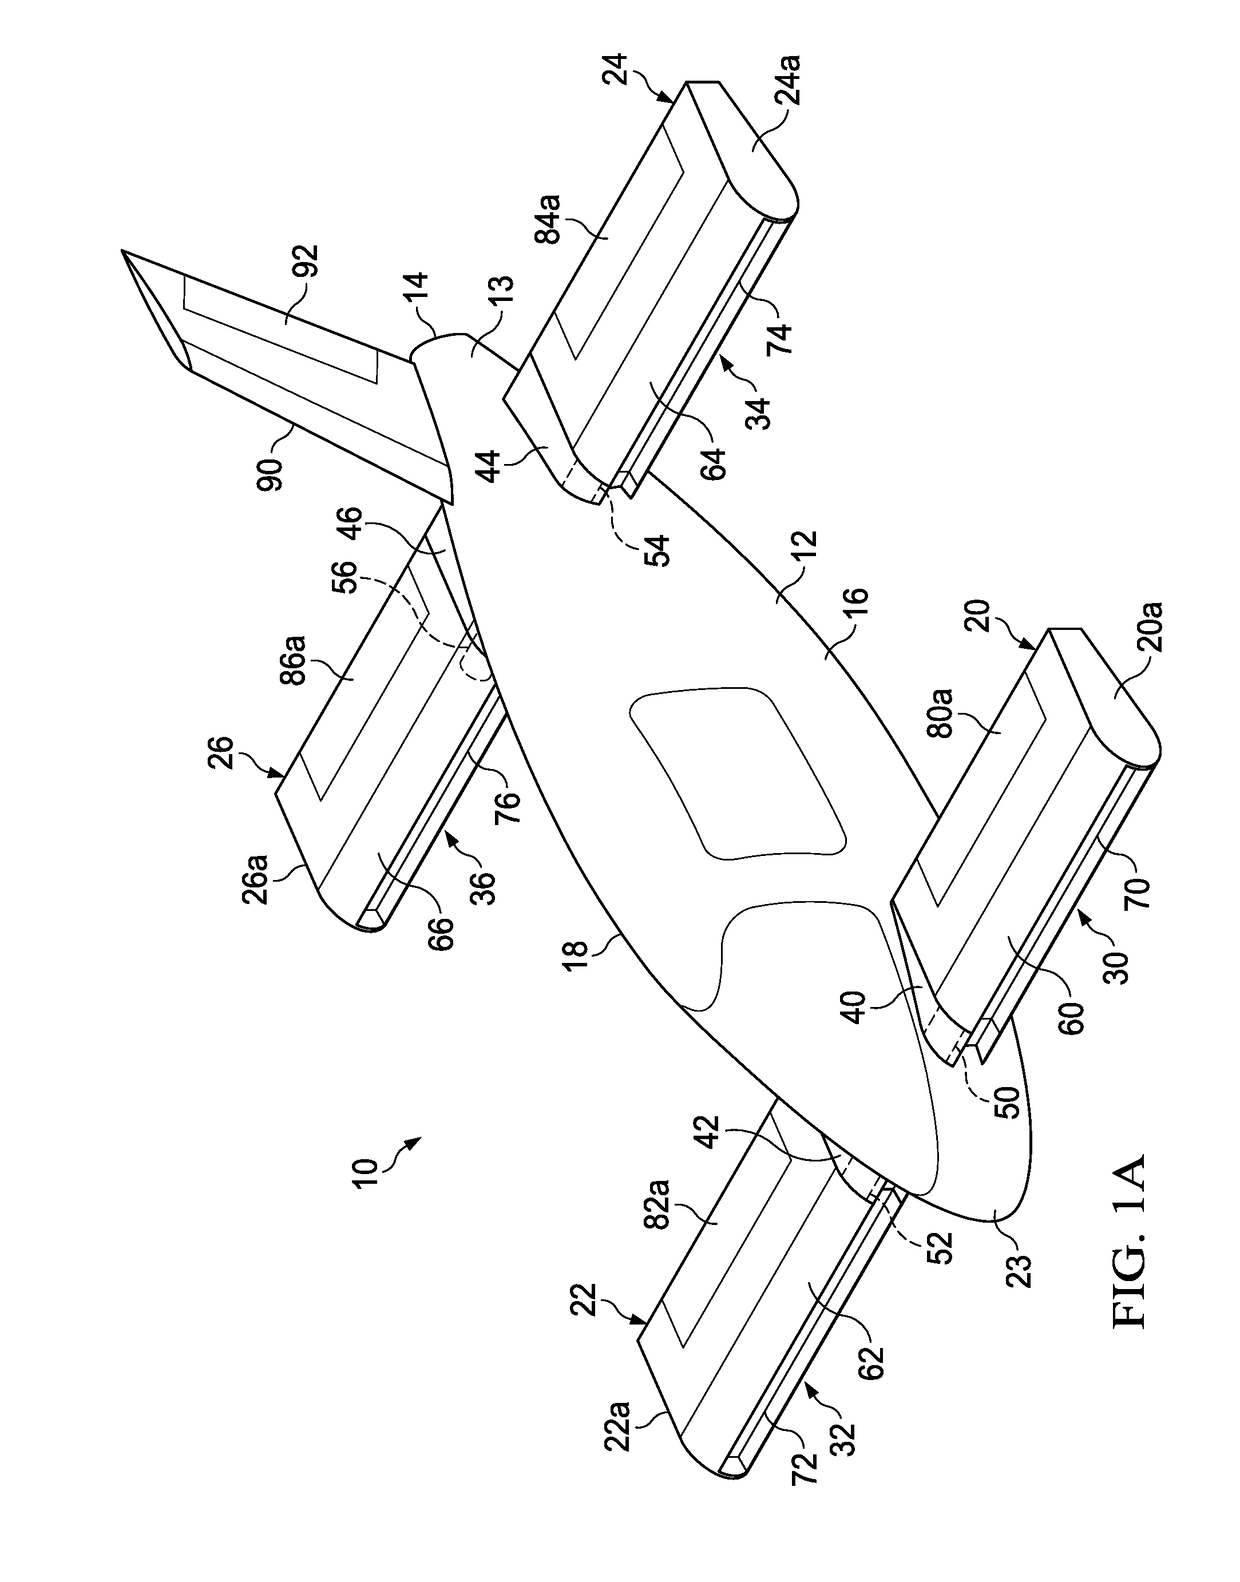 Apparatus and method for directing thrust from tilting cross-flow fan wings on an aircraft